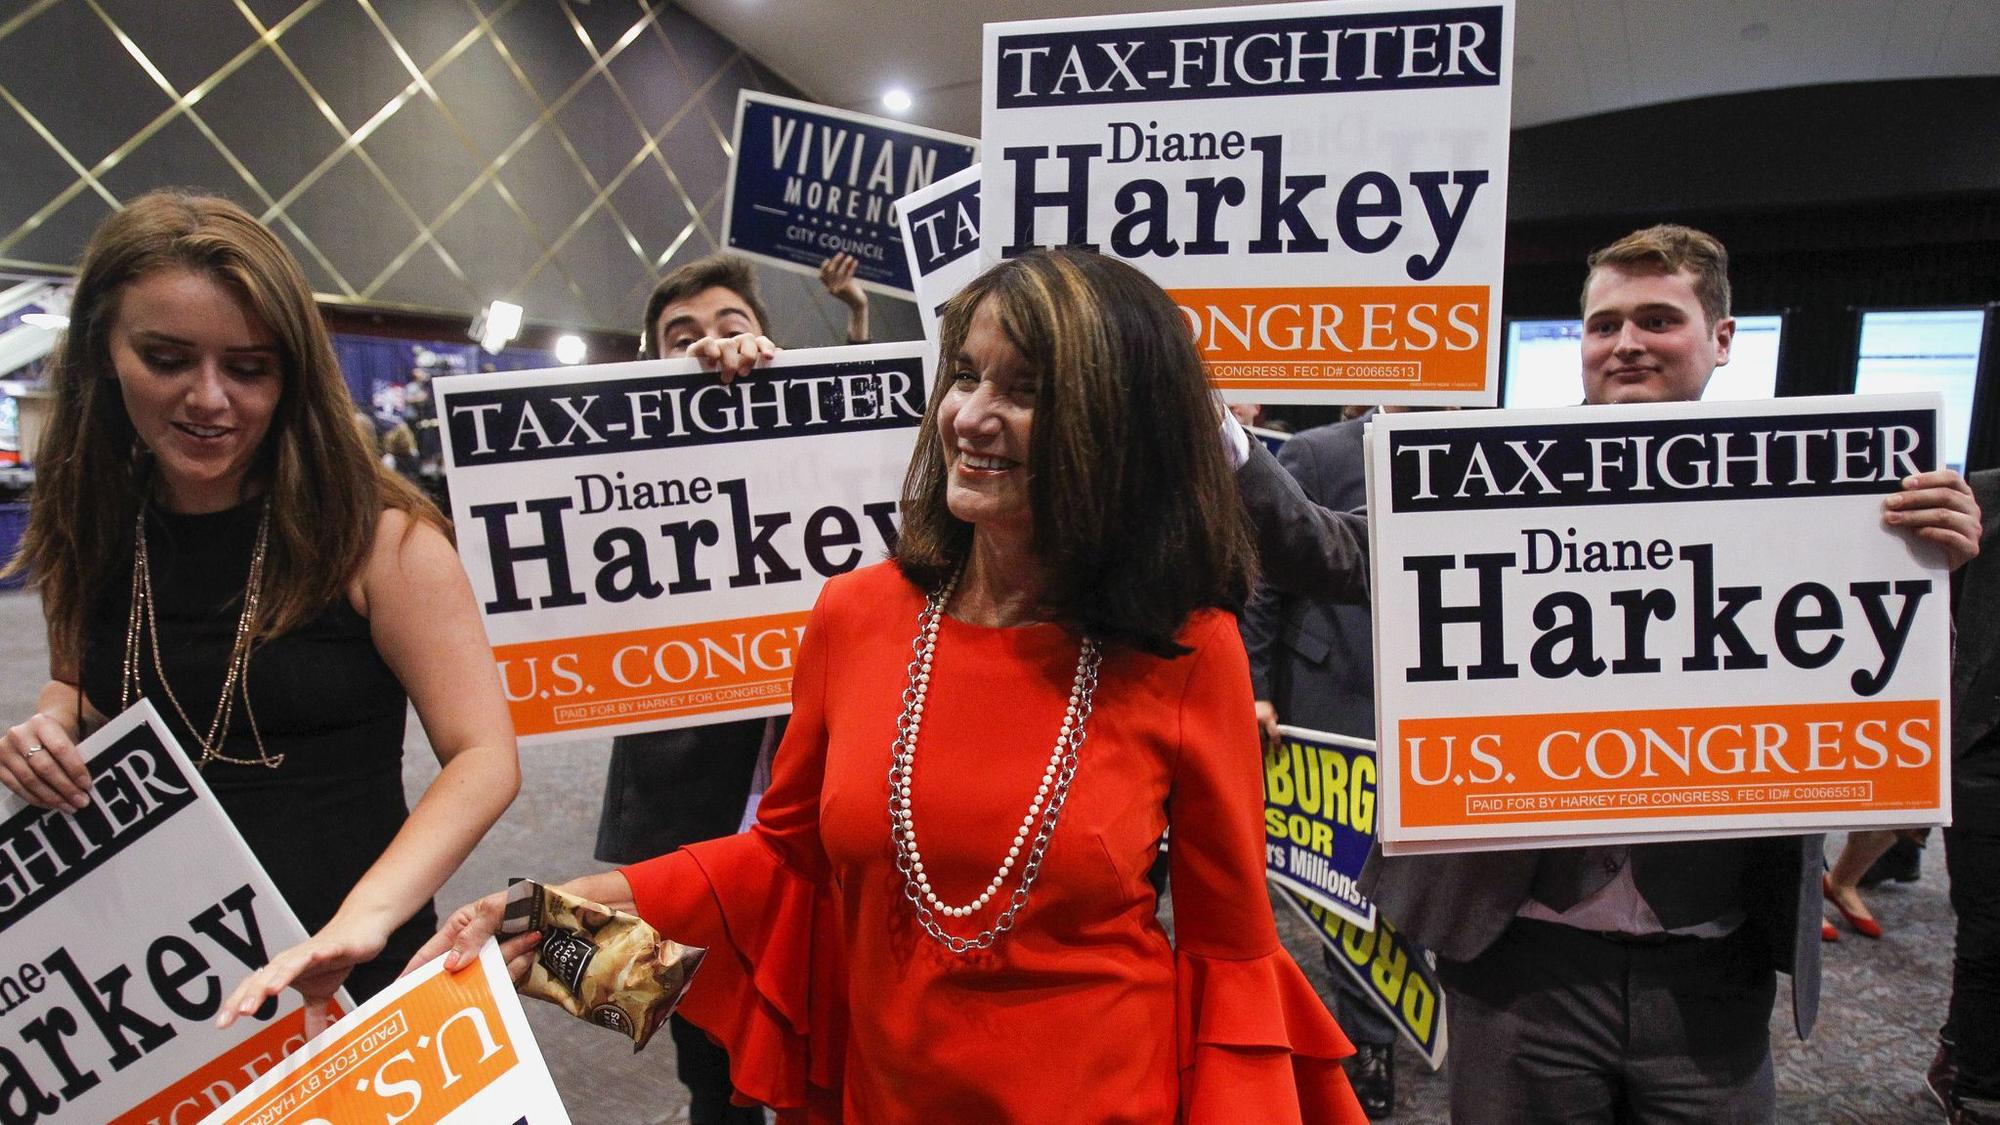 SAN DIEGO, June 5, 2018 | Diane Harkey, candidate for the 49th Congressional District, with her supp